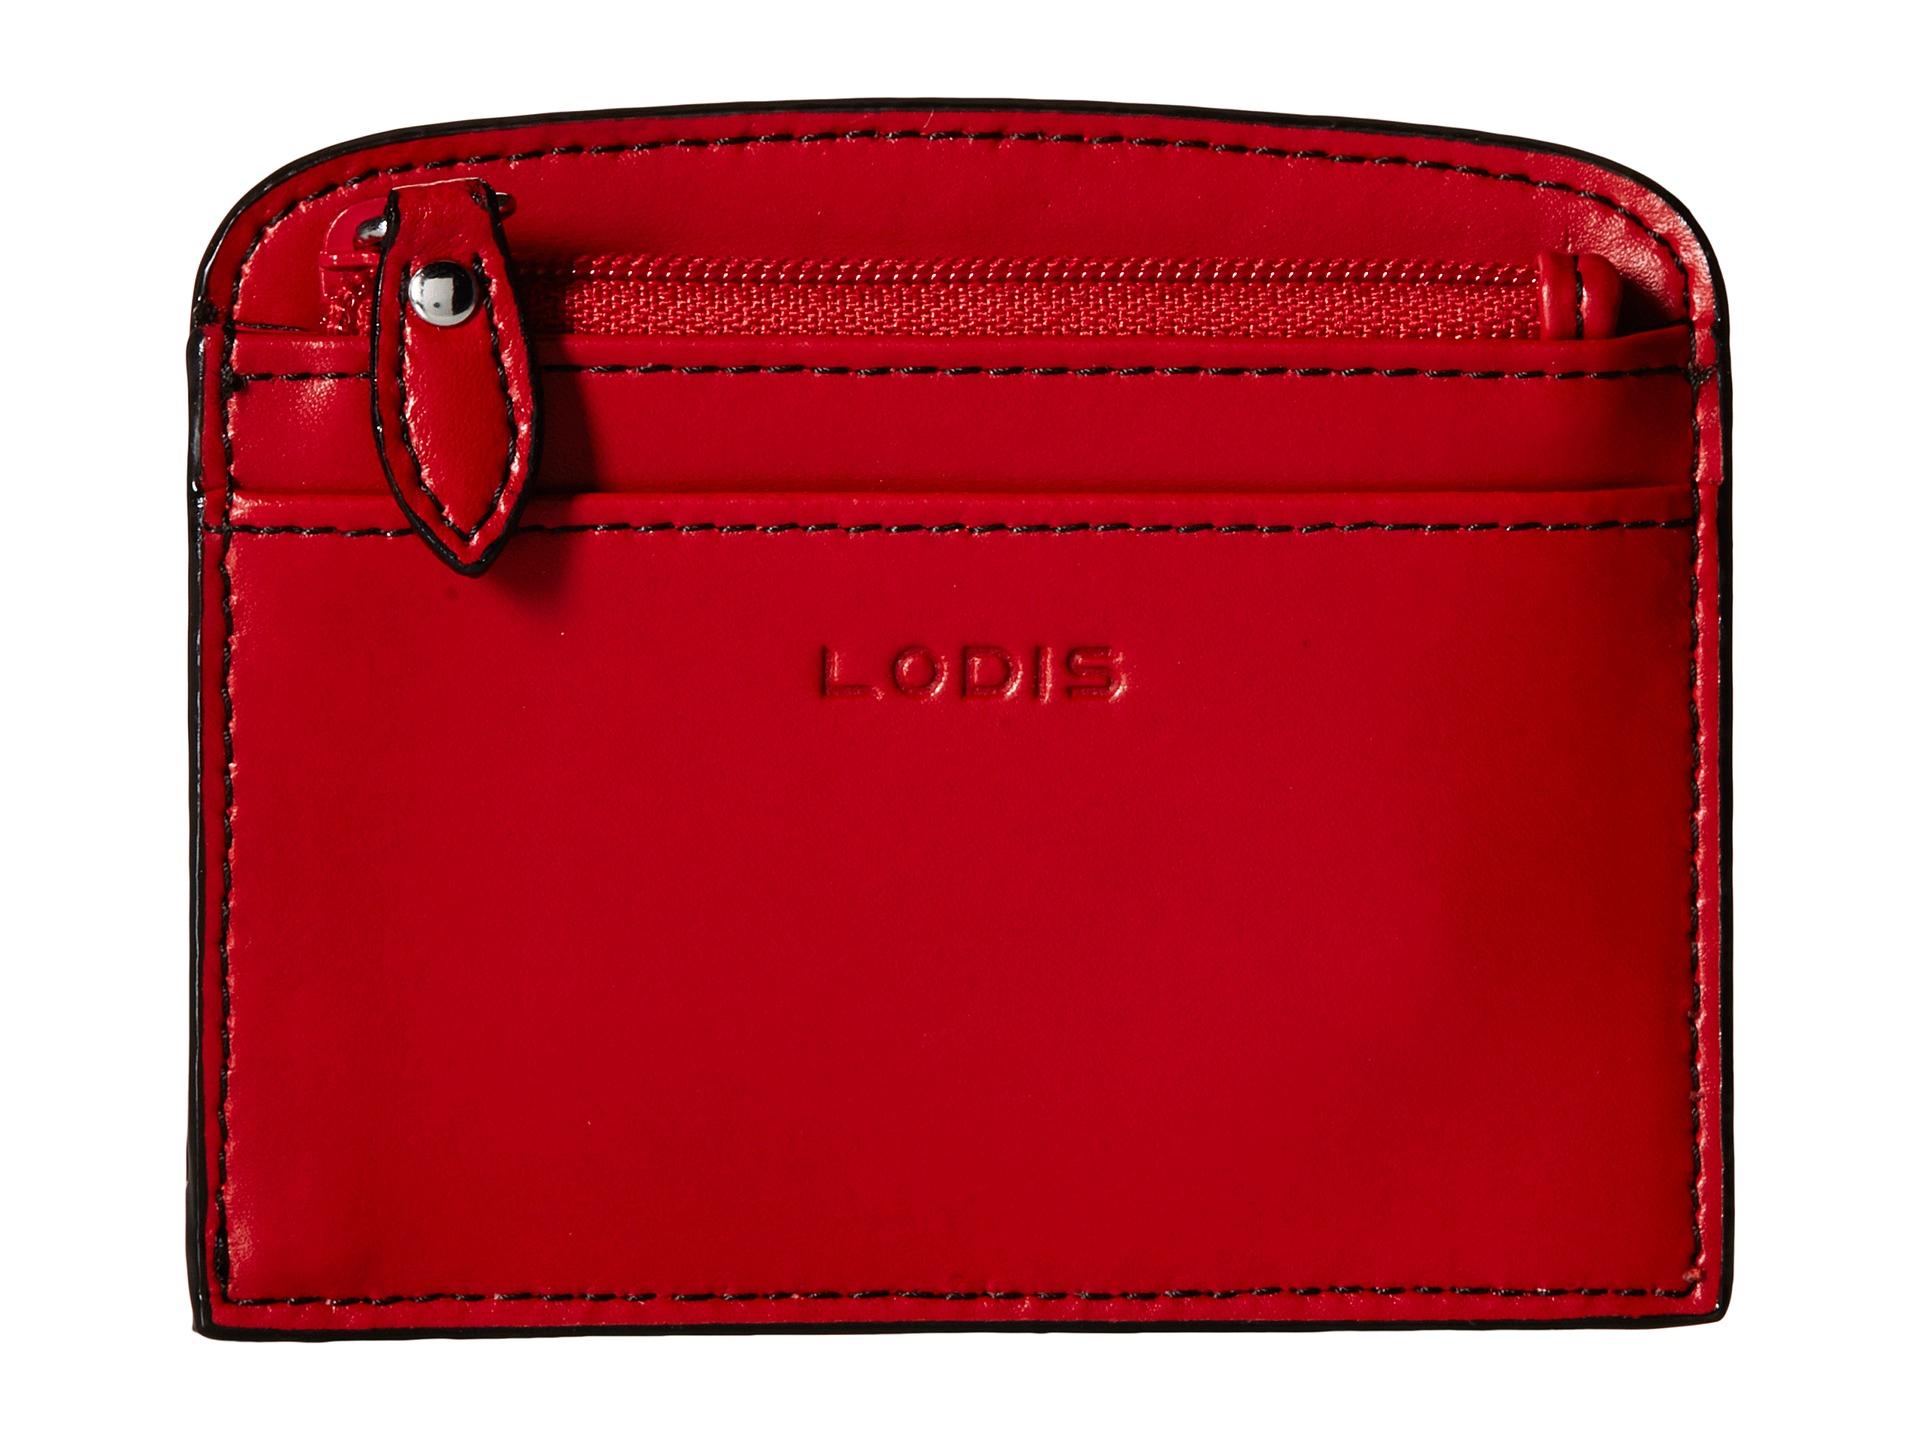 Lyst - Lodis Audrey Laci Card Case in Red